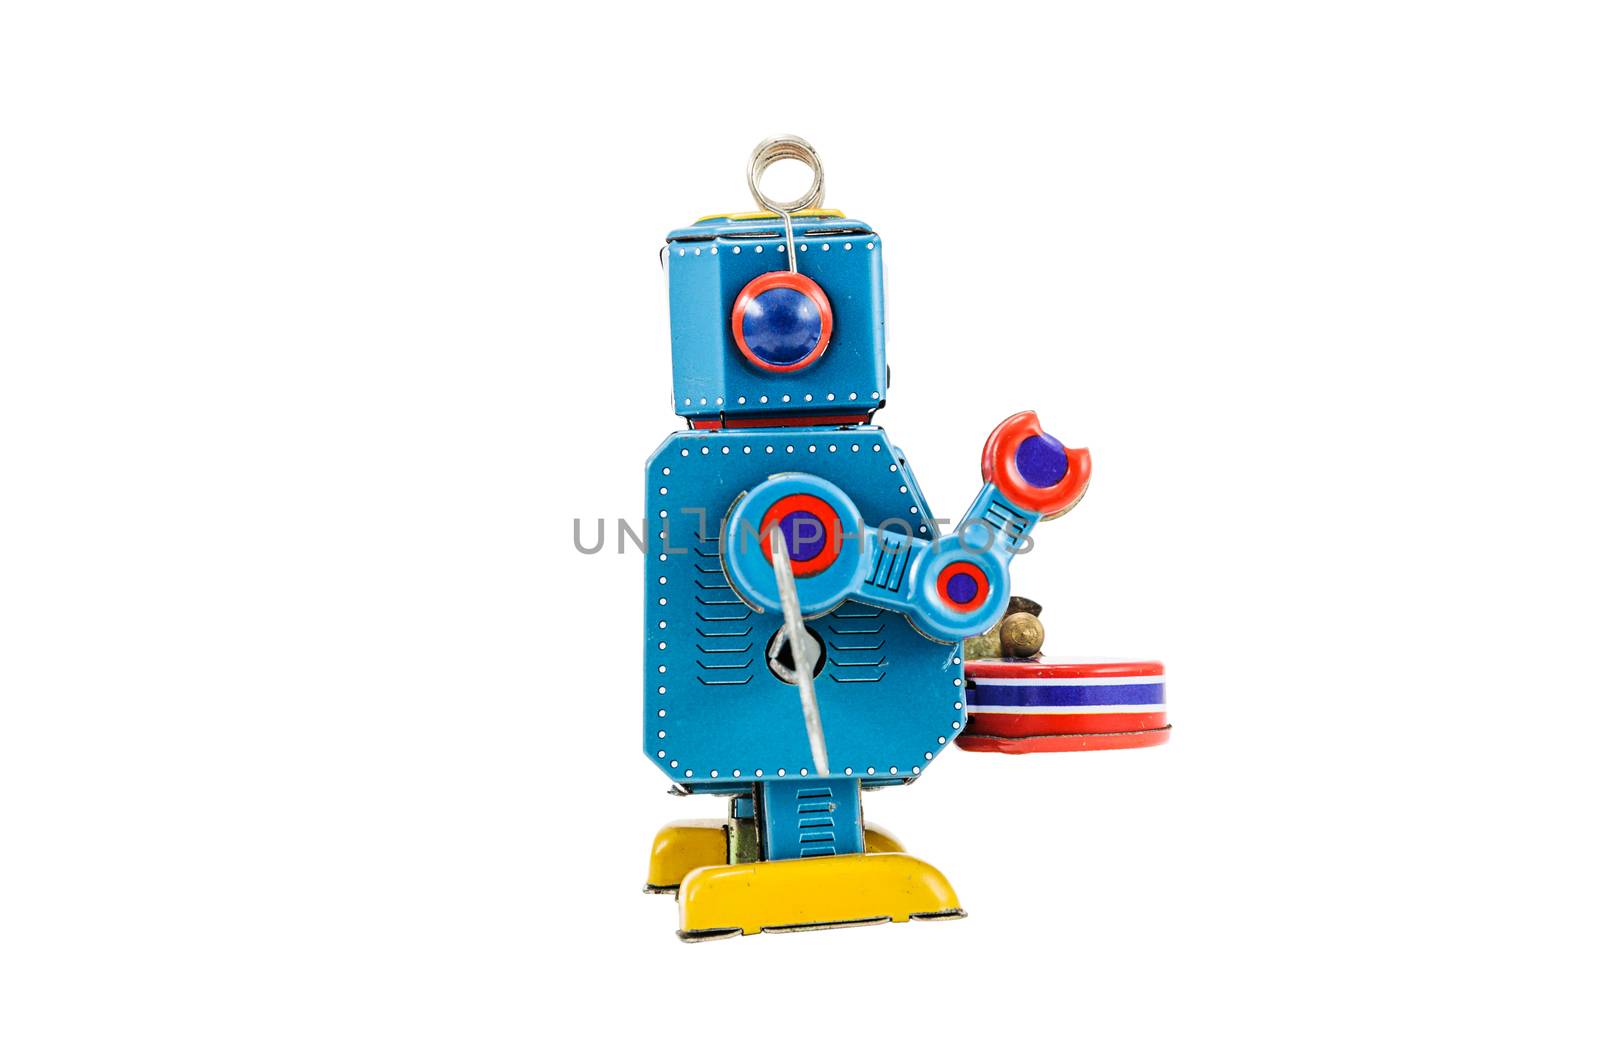 Retro robot toys isolated on white background with clipping path